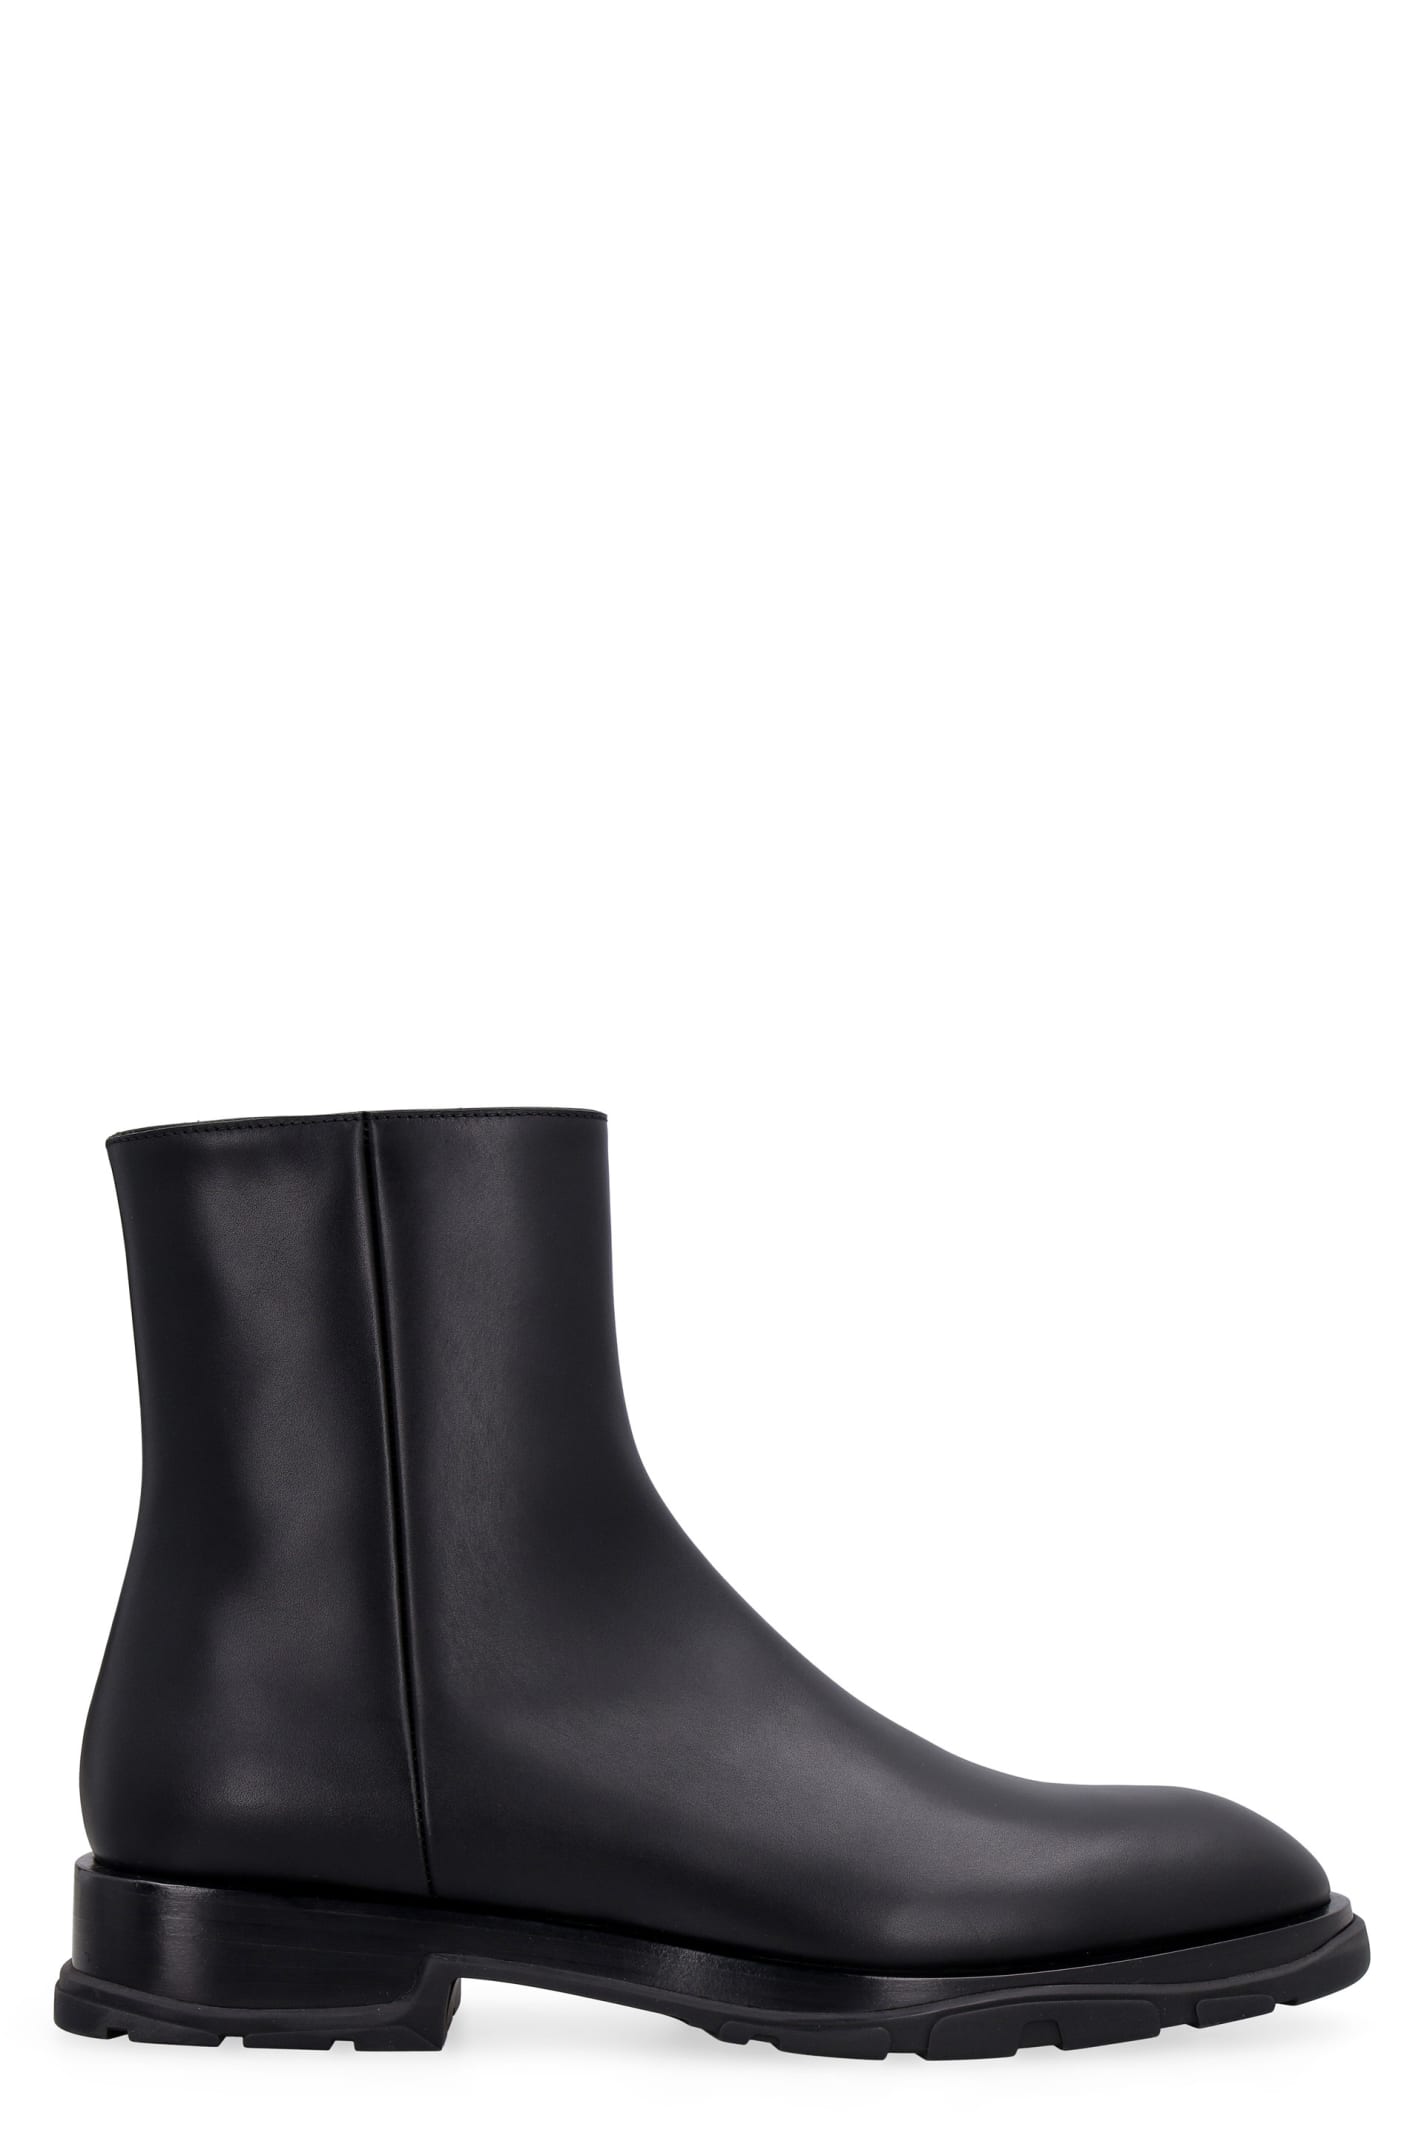 Alexander McQueen Slim Tread Leather Ankle Boots